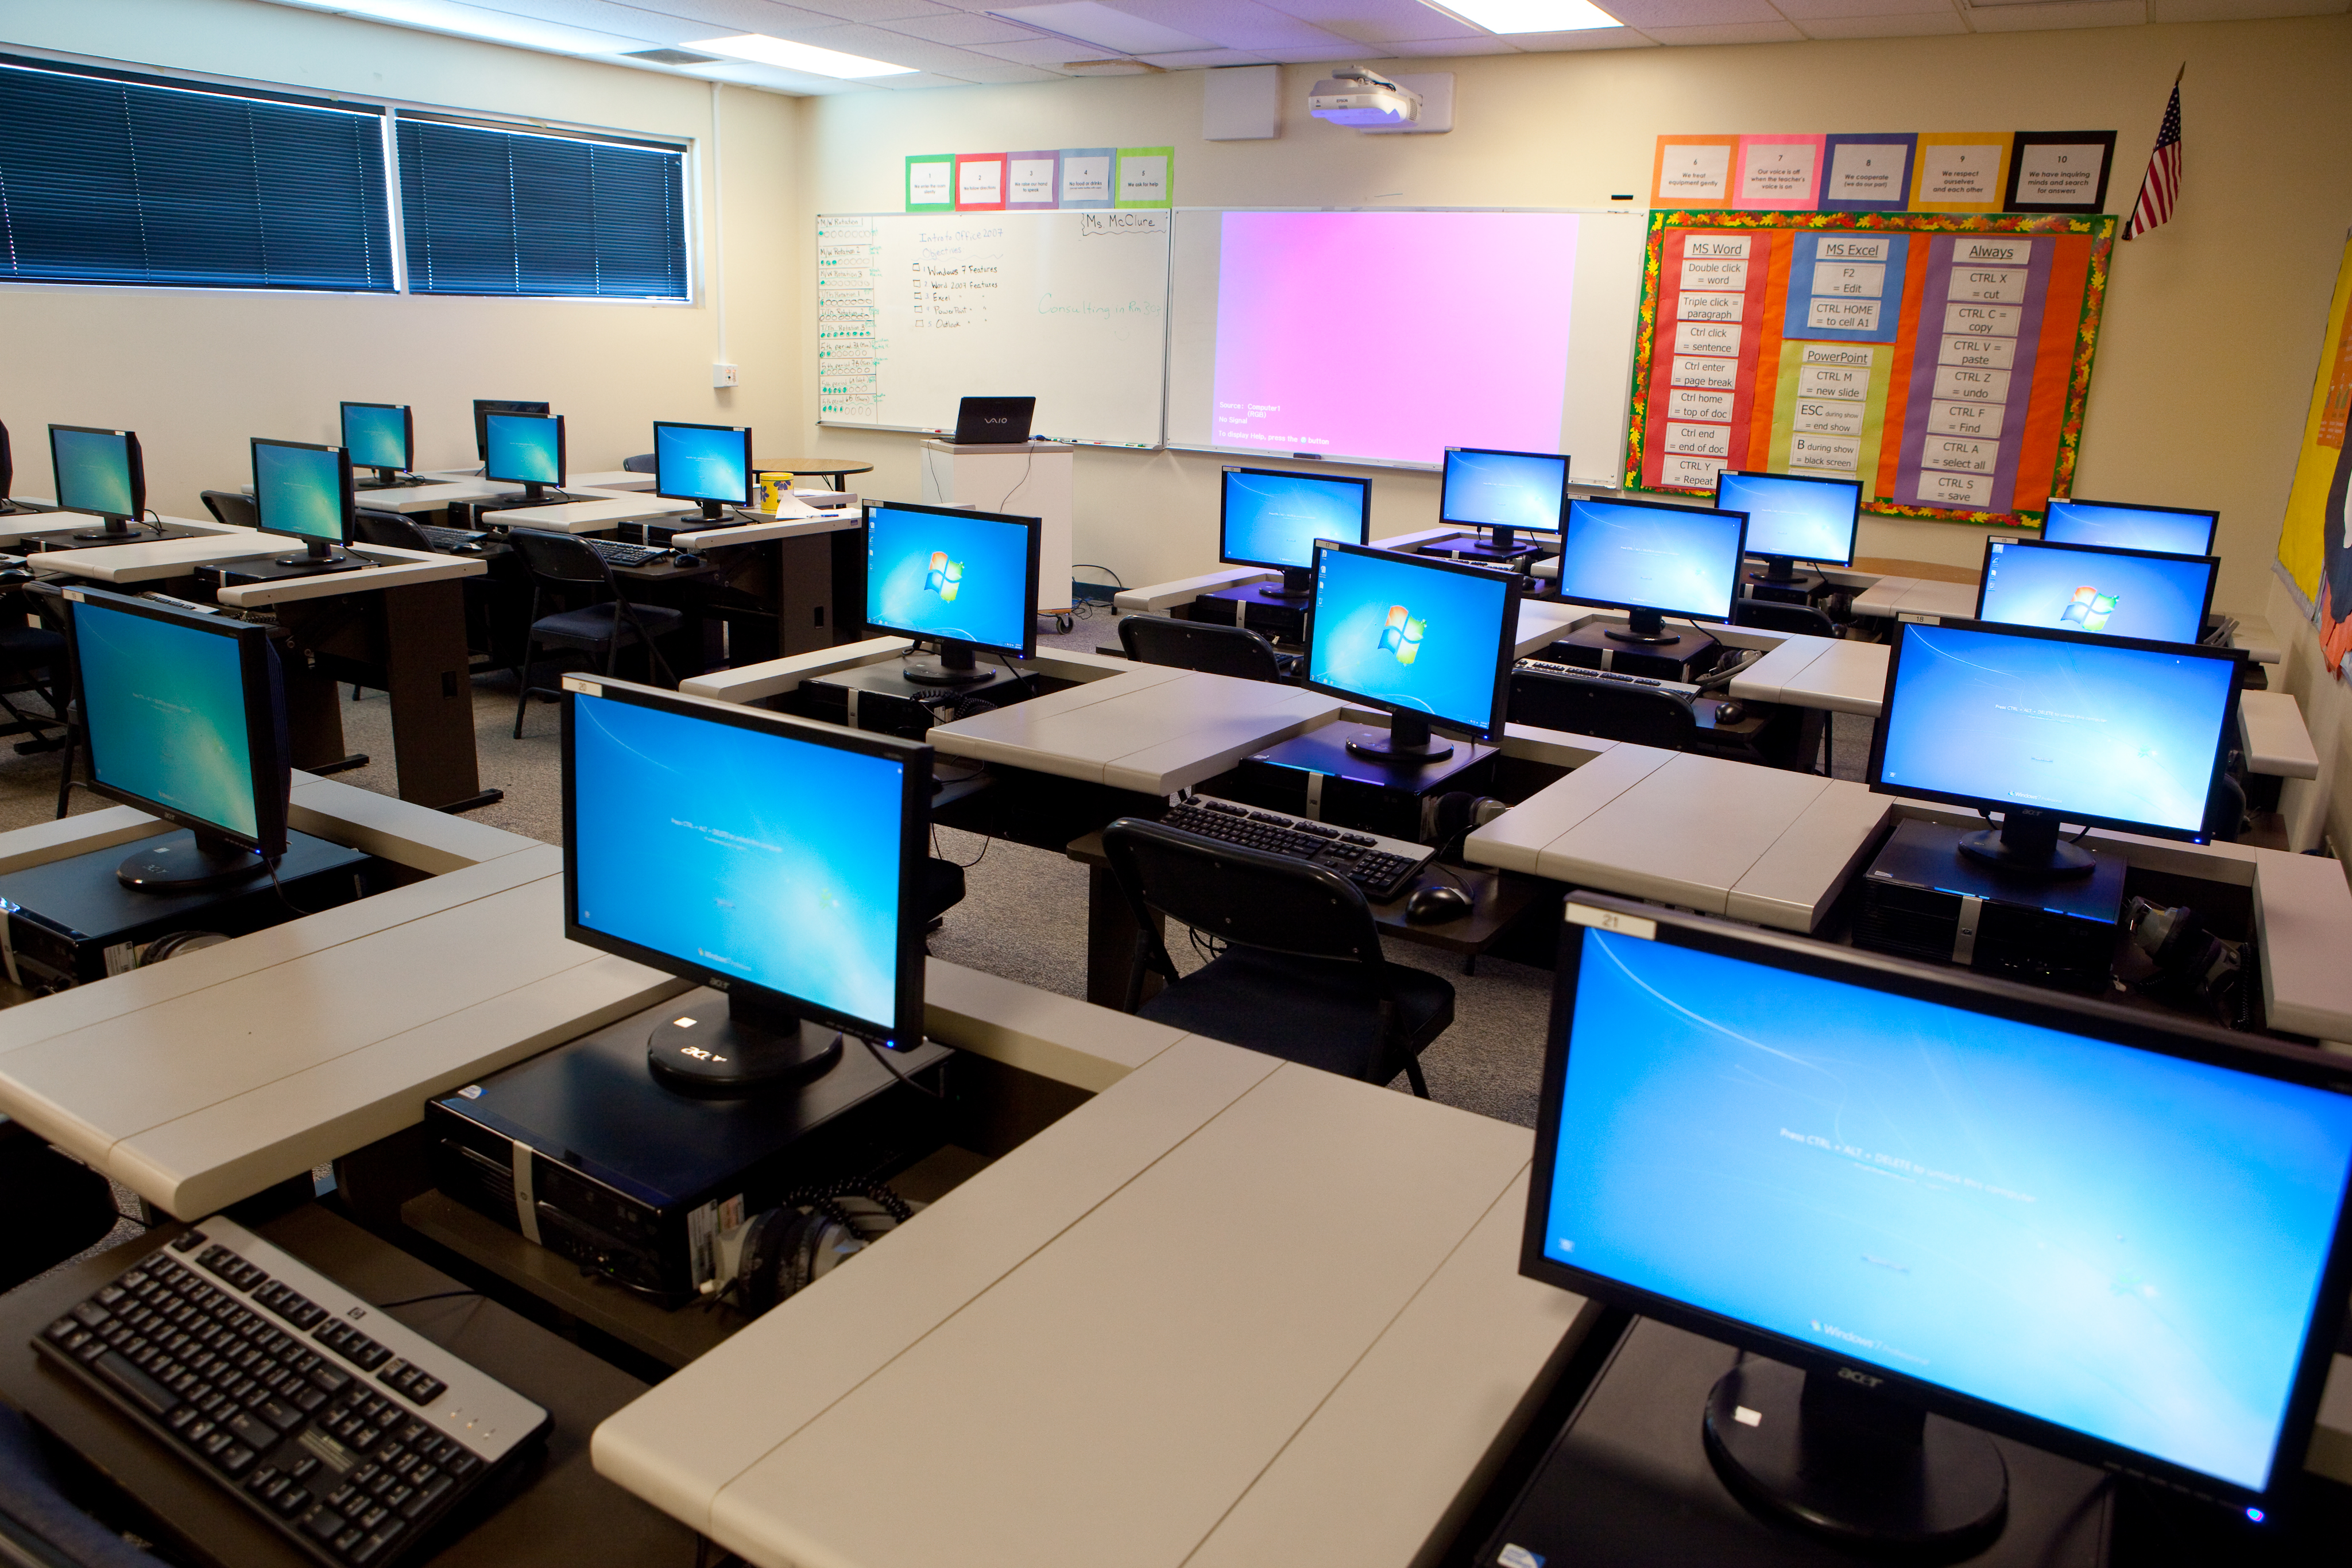 Spyware routinely installed by UK schools to snoop on kids ...